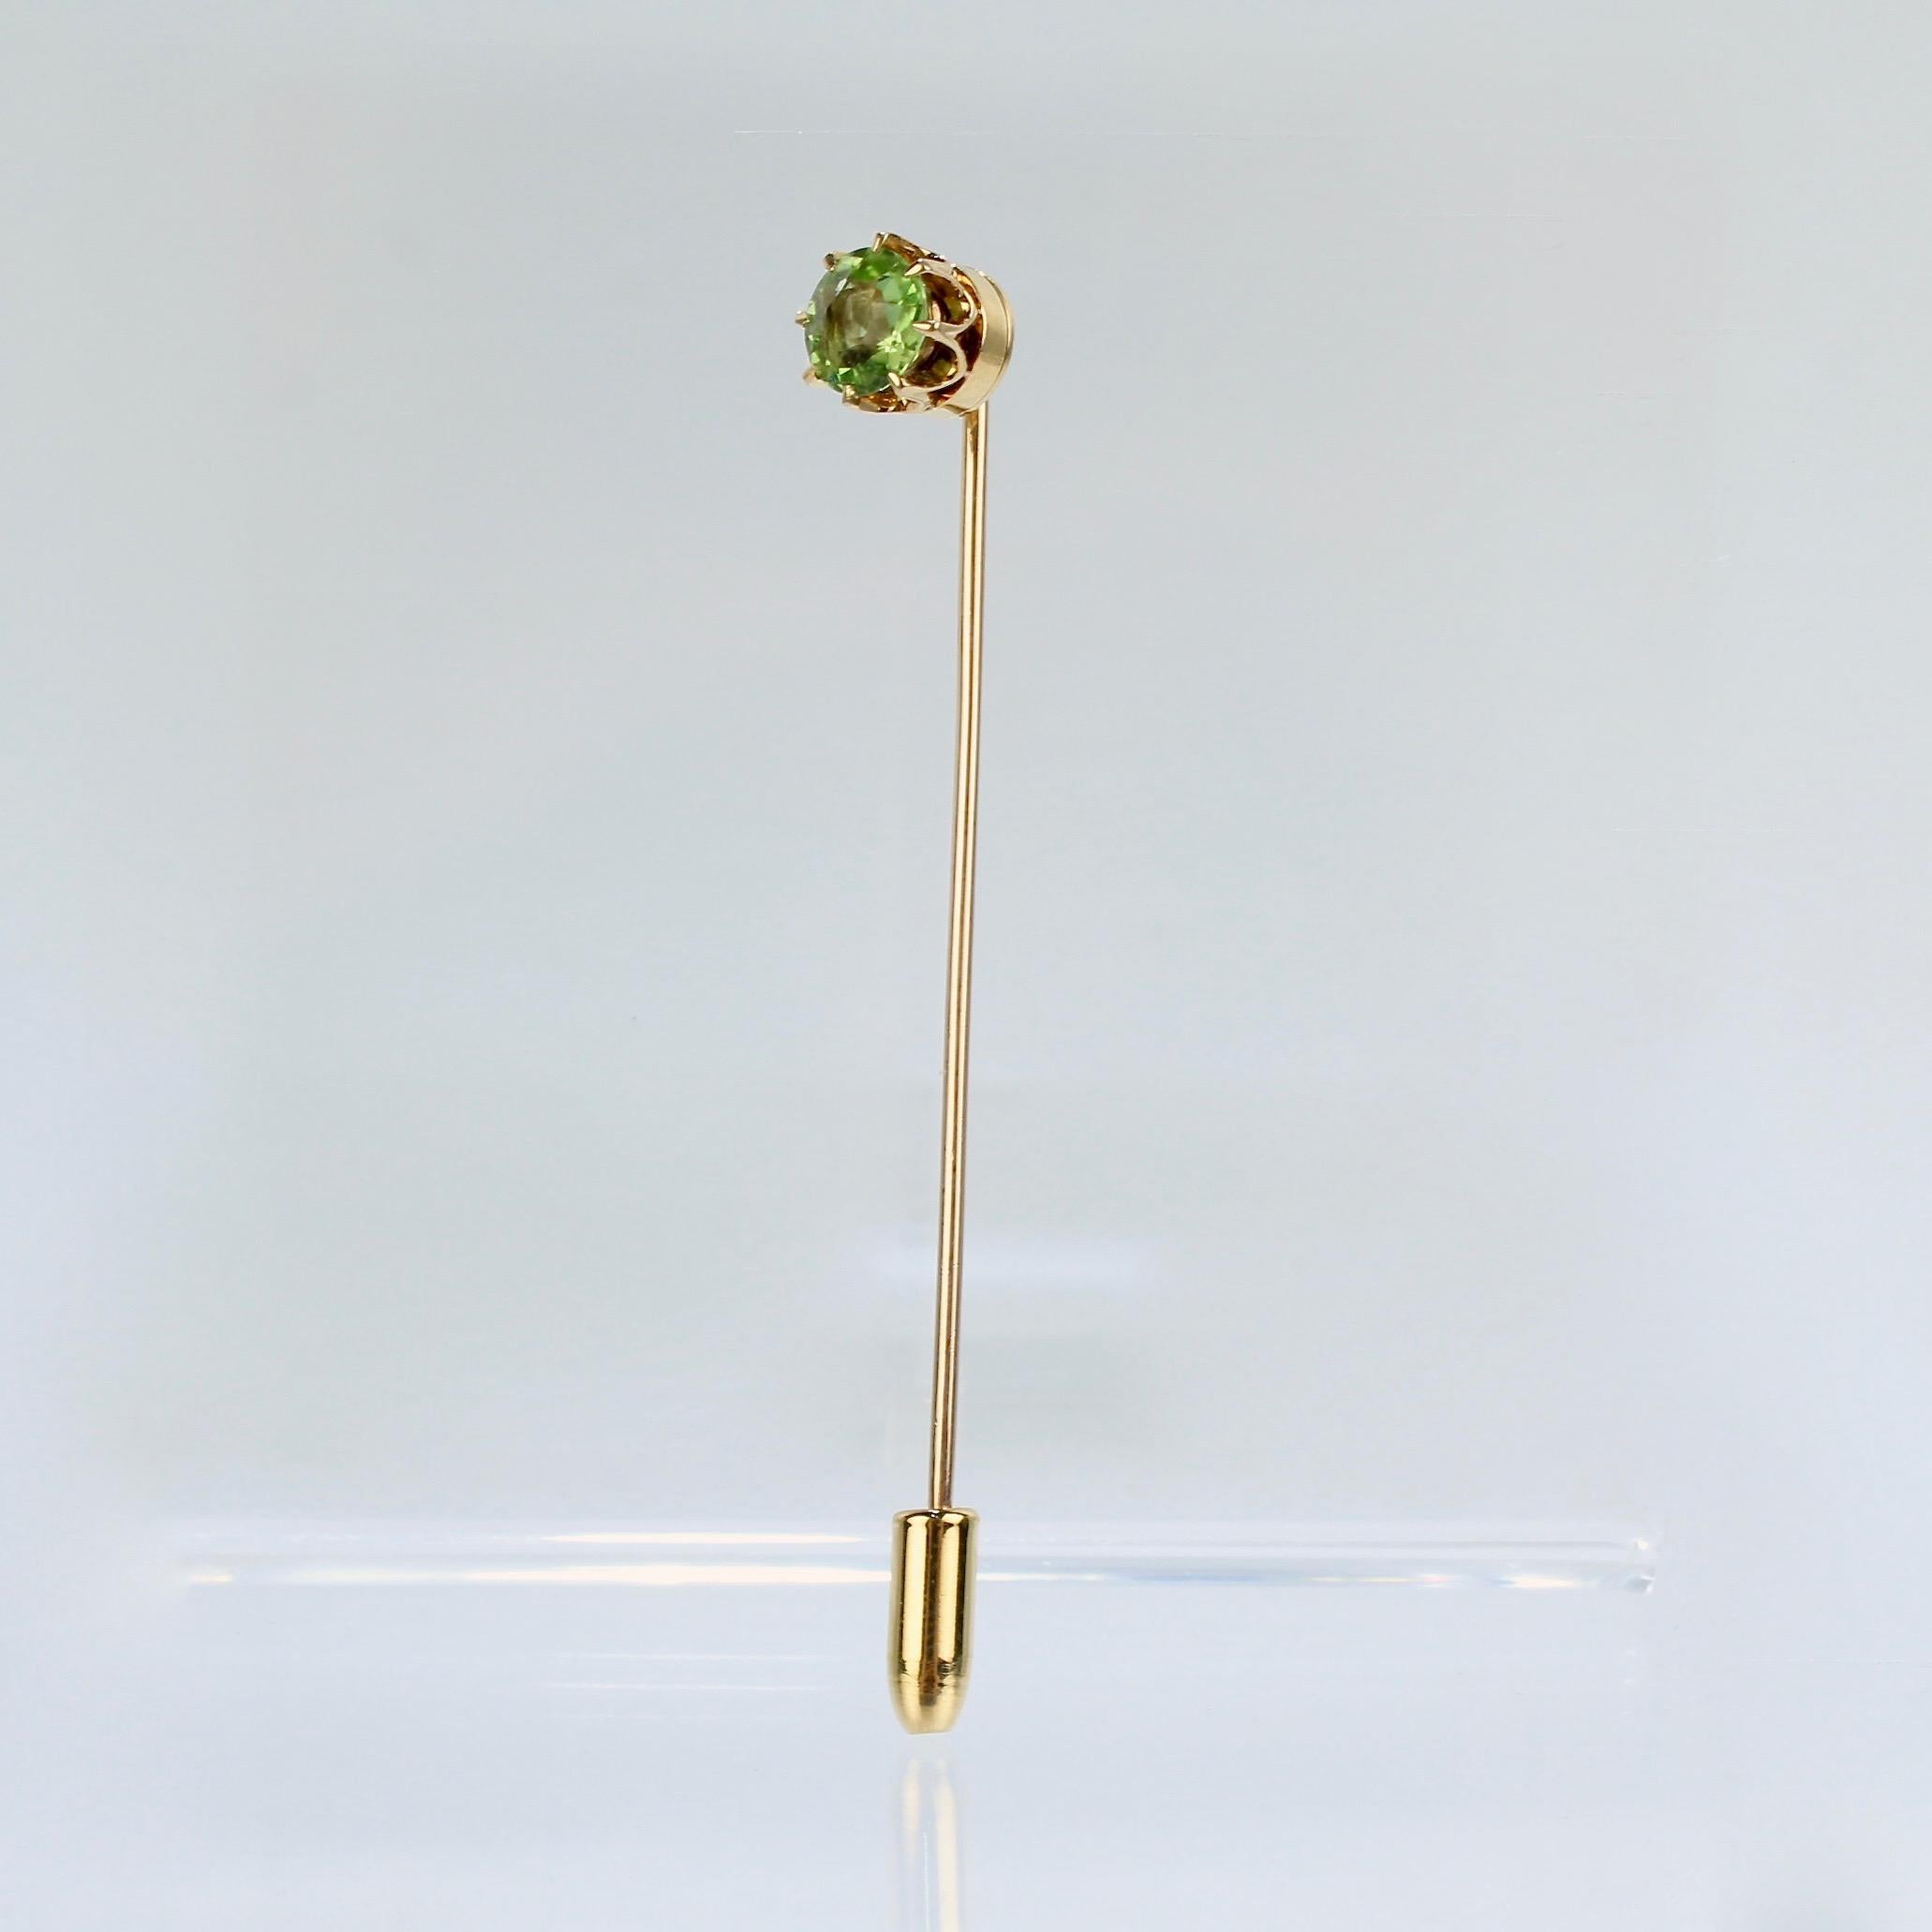 A fine 14k gold and peridot stick pin.

With a bright green basket-set peridot gemstone mounted on a threaded gold stem.
Complete with an end cap for extra safety.

Unmarked for fineness or maker. Professionally tests at 14k.

Length ca. 68